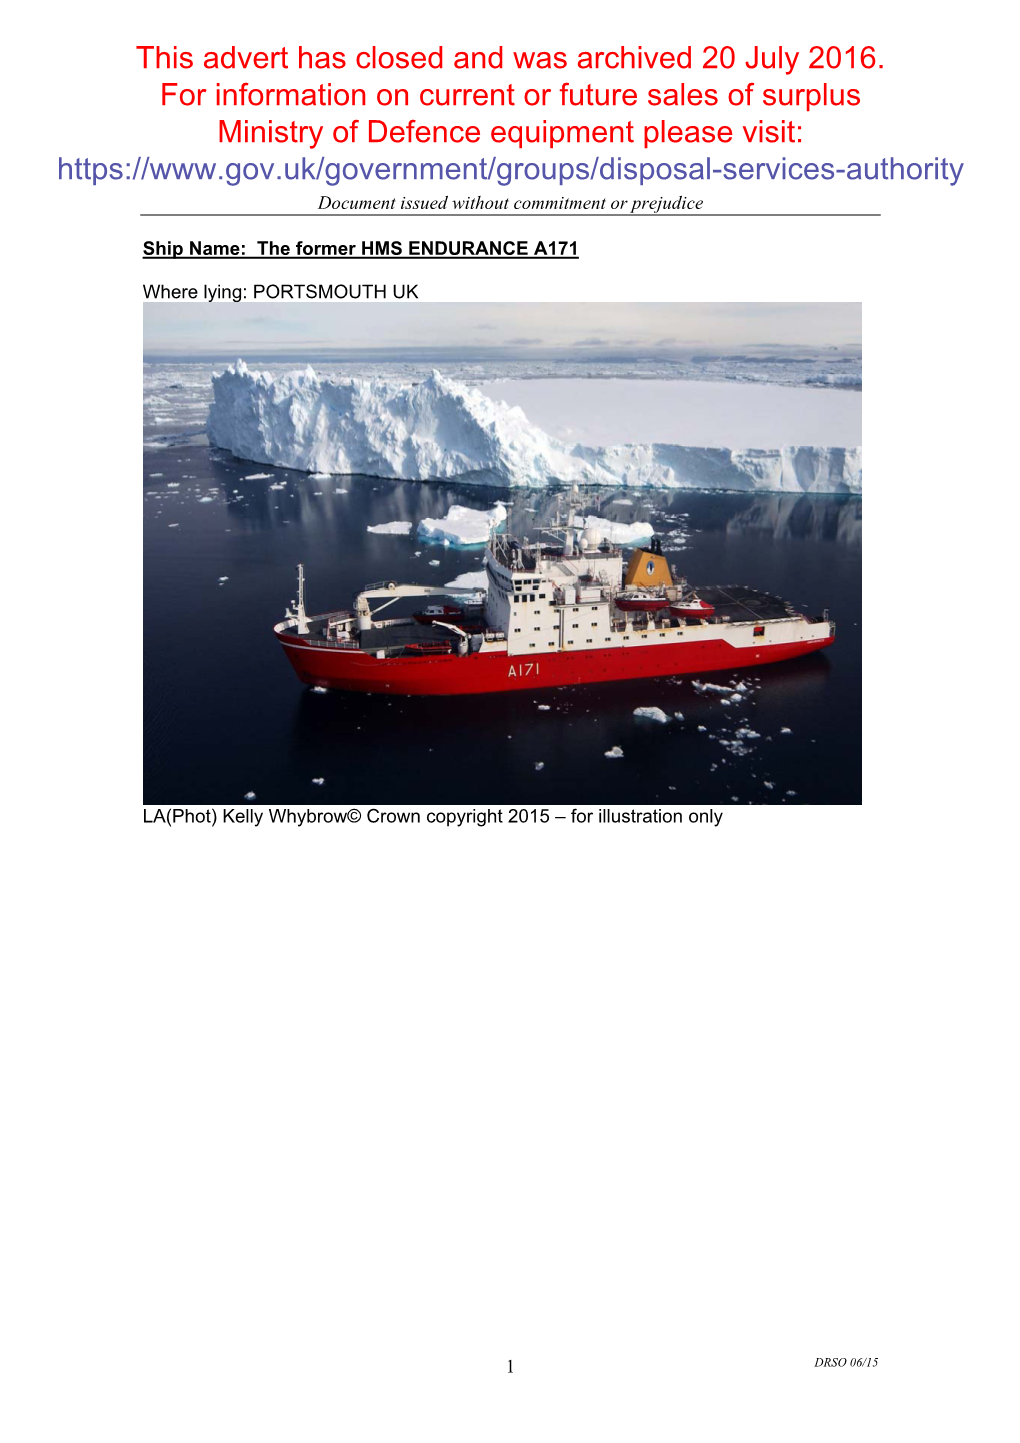 Sales Particulars: Former HMS Endurance A171 (Archived 20 July